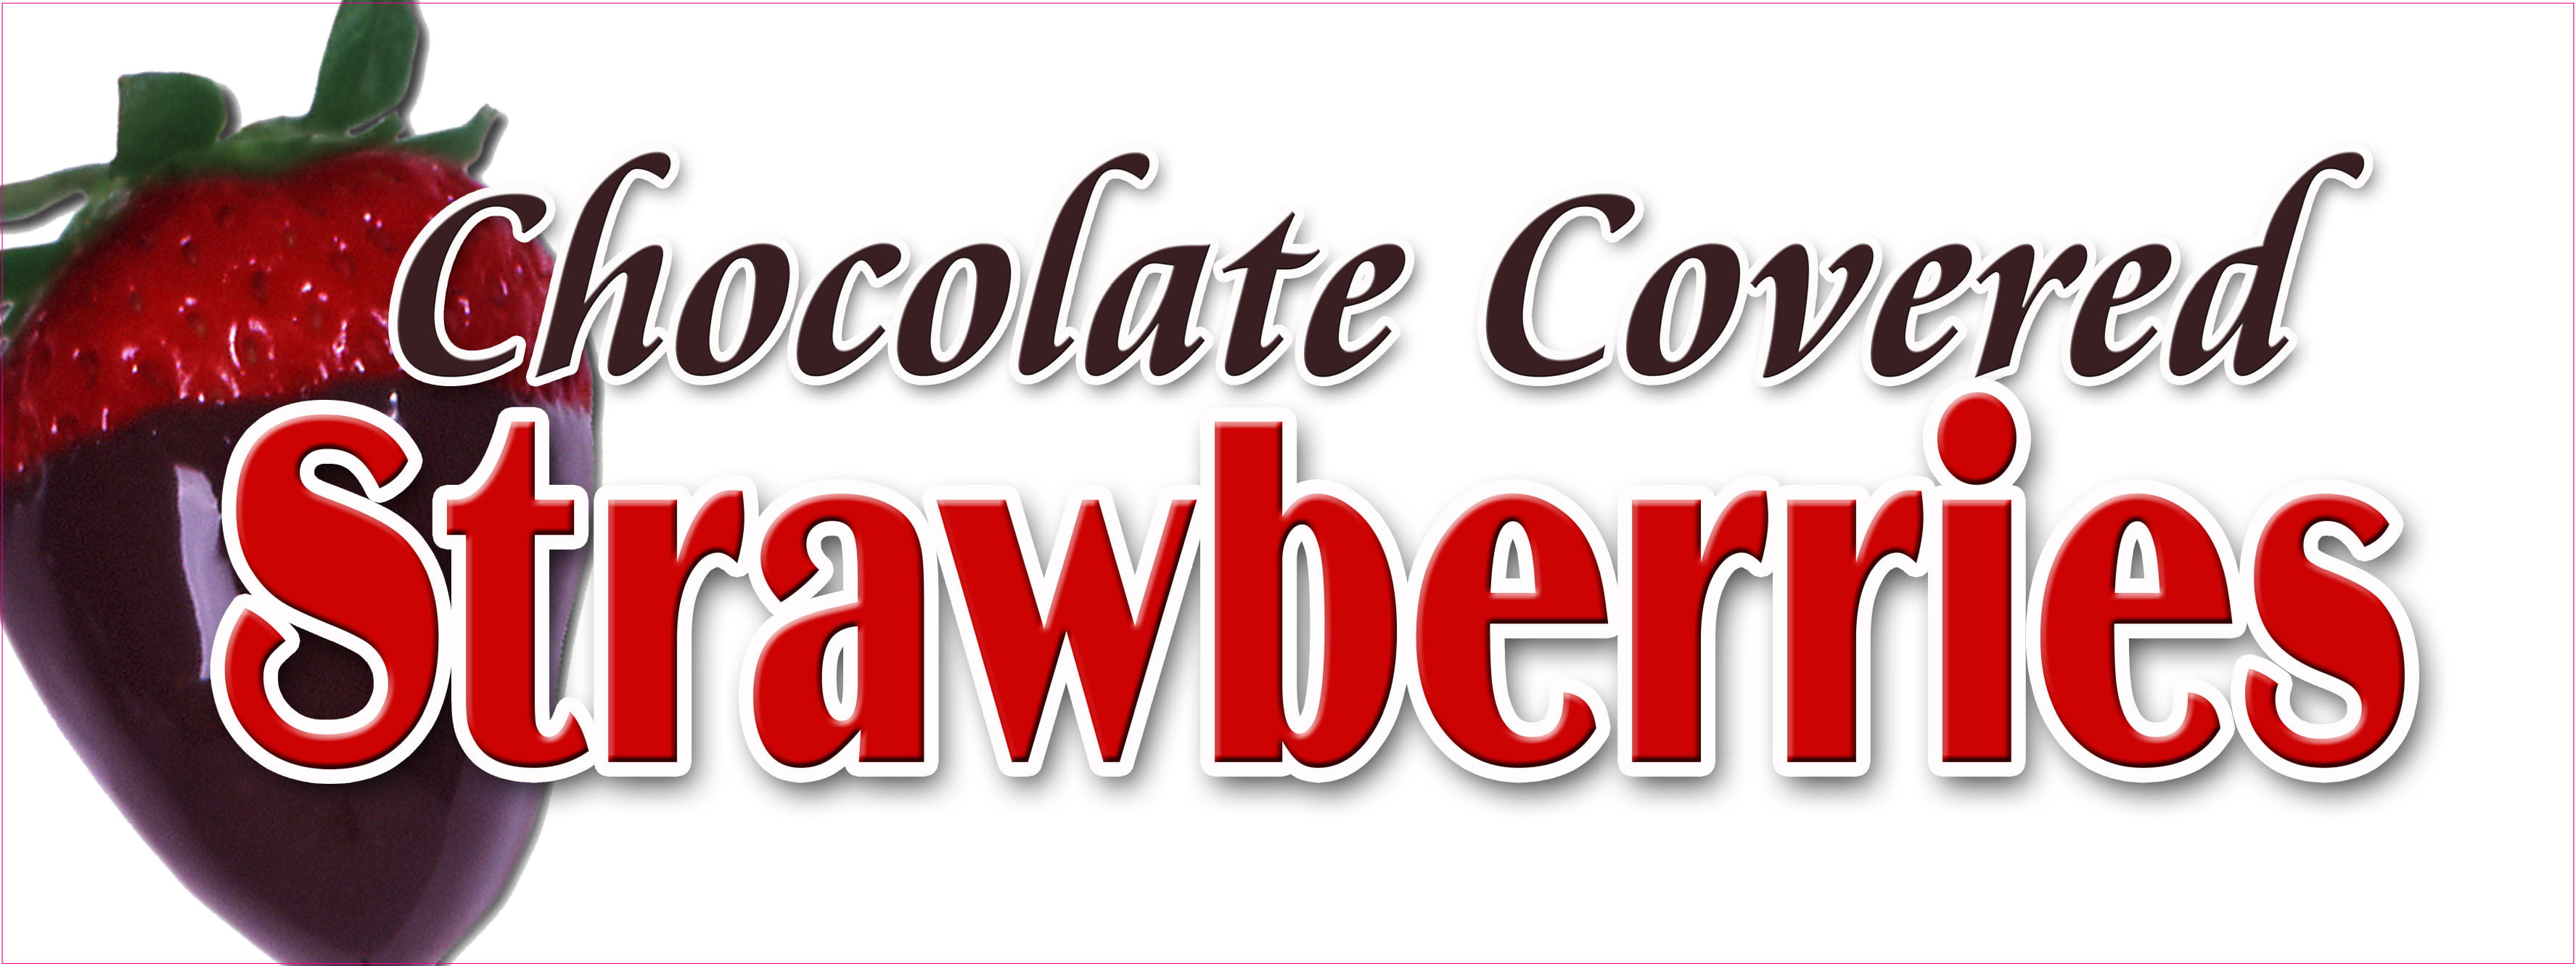 Food Truck Decals Dipped Chocolate Covered Strawberries Concession Die-Cut Vinyl 